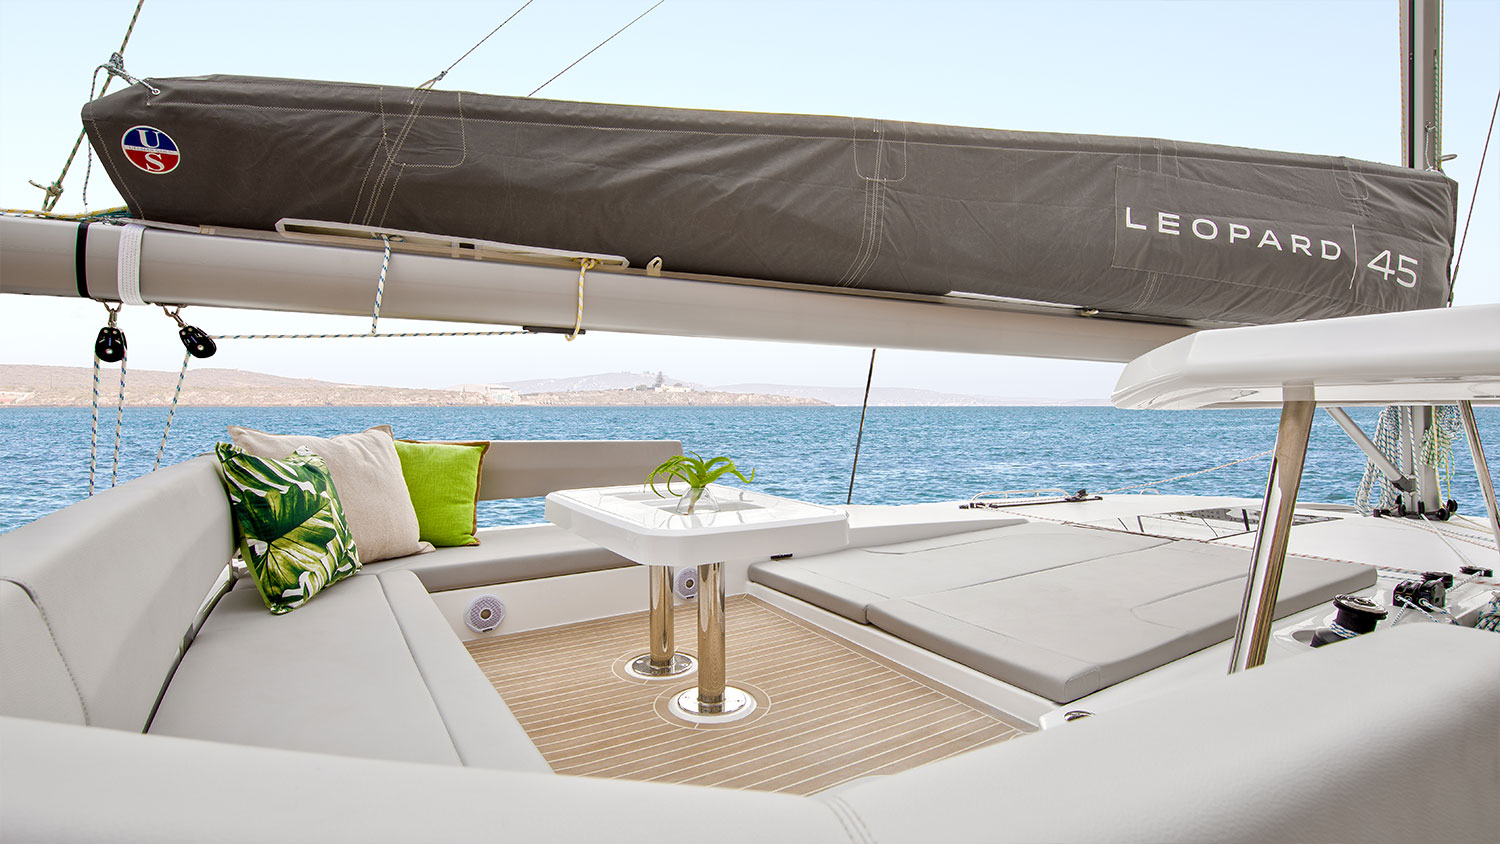 how much does a leopard 45 catamaran cost